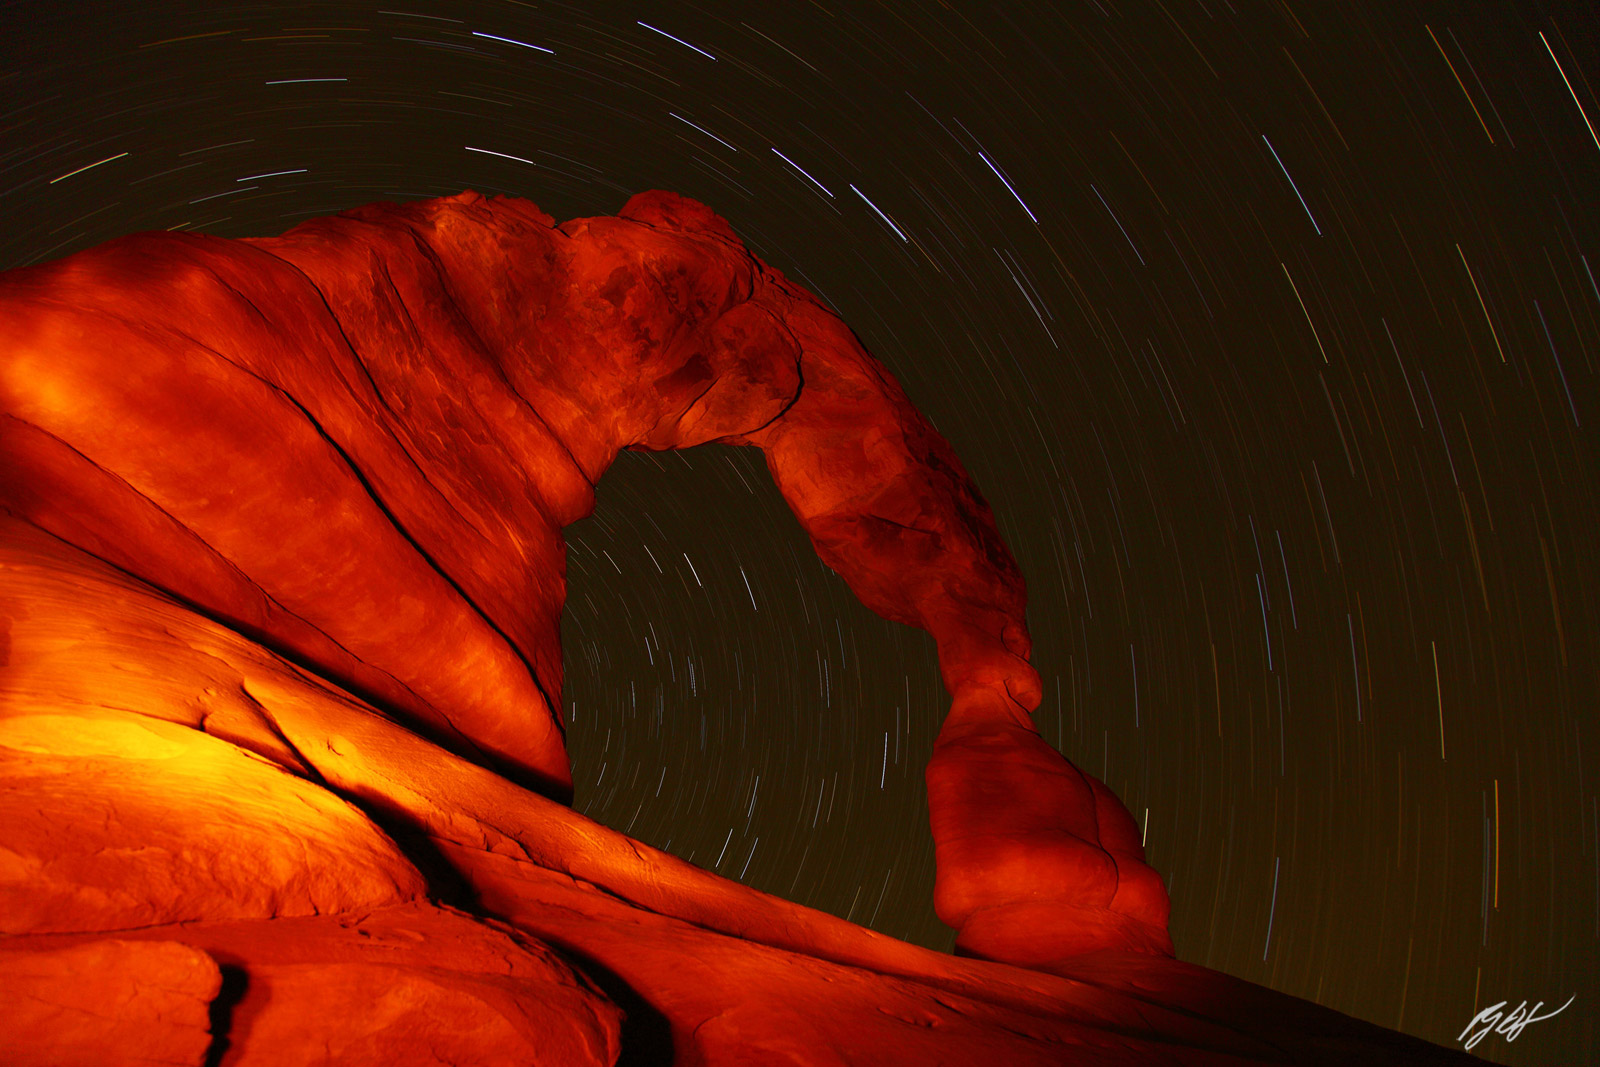 Star Trails and the Delicate Arch, Arches National Park, Utah